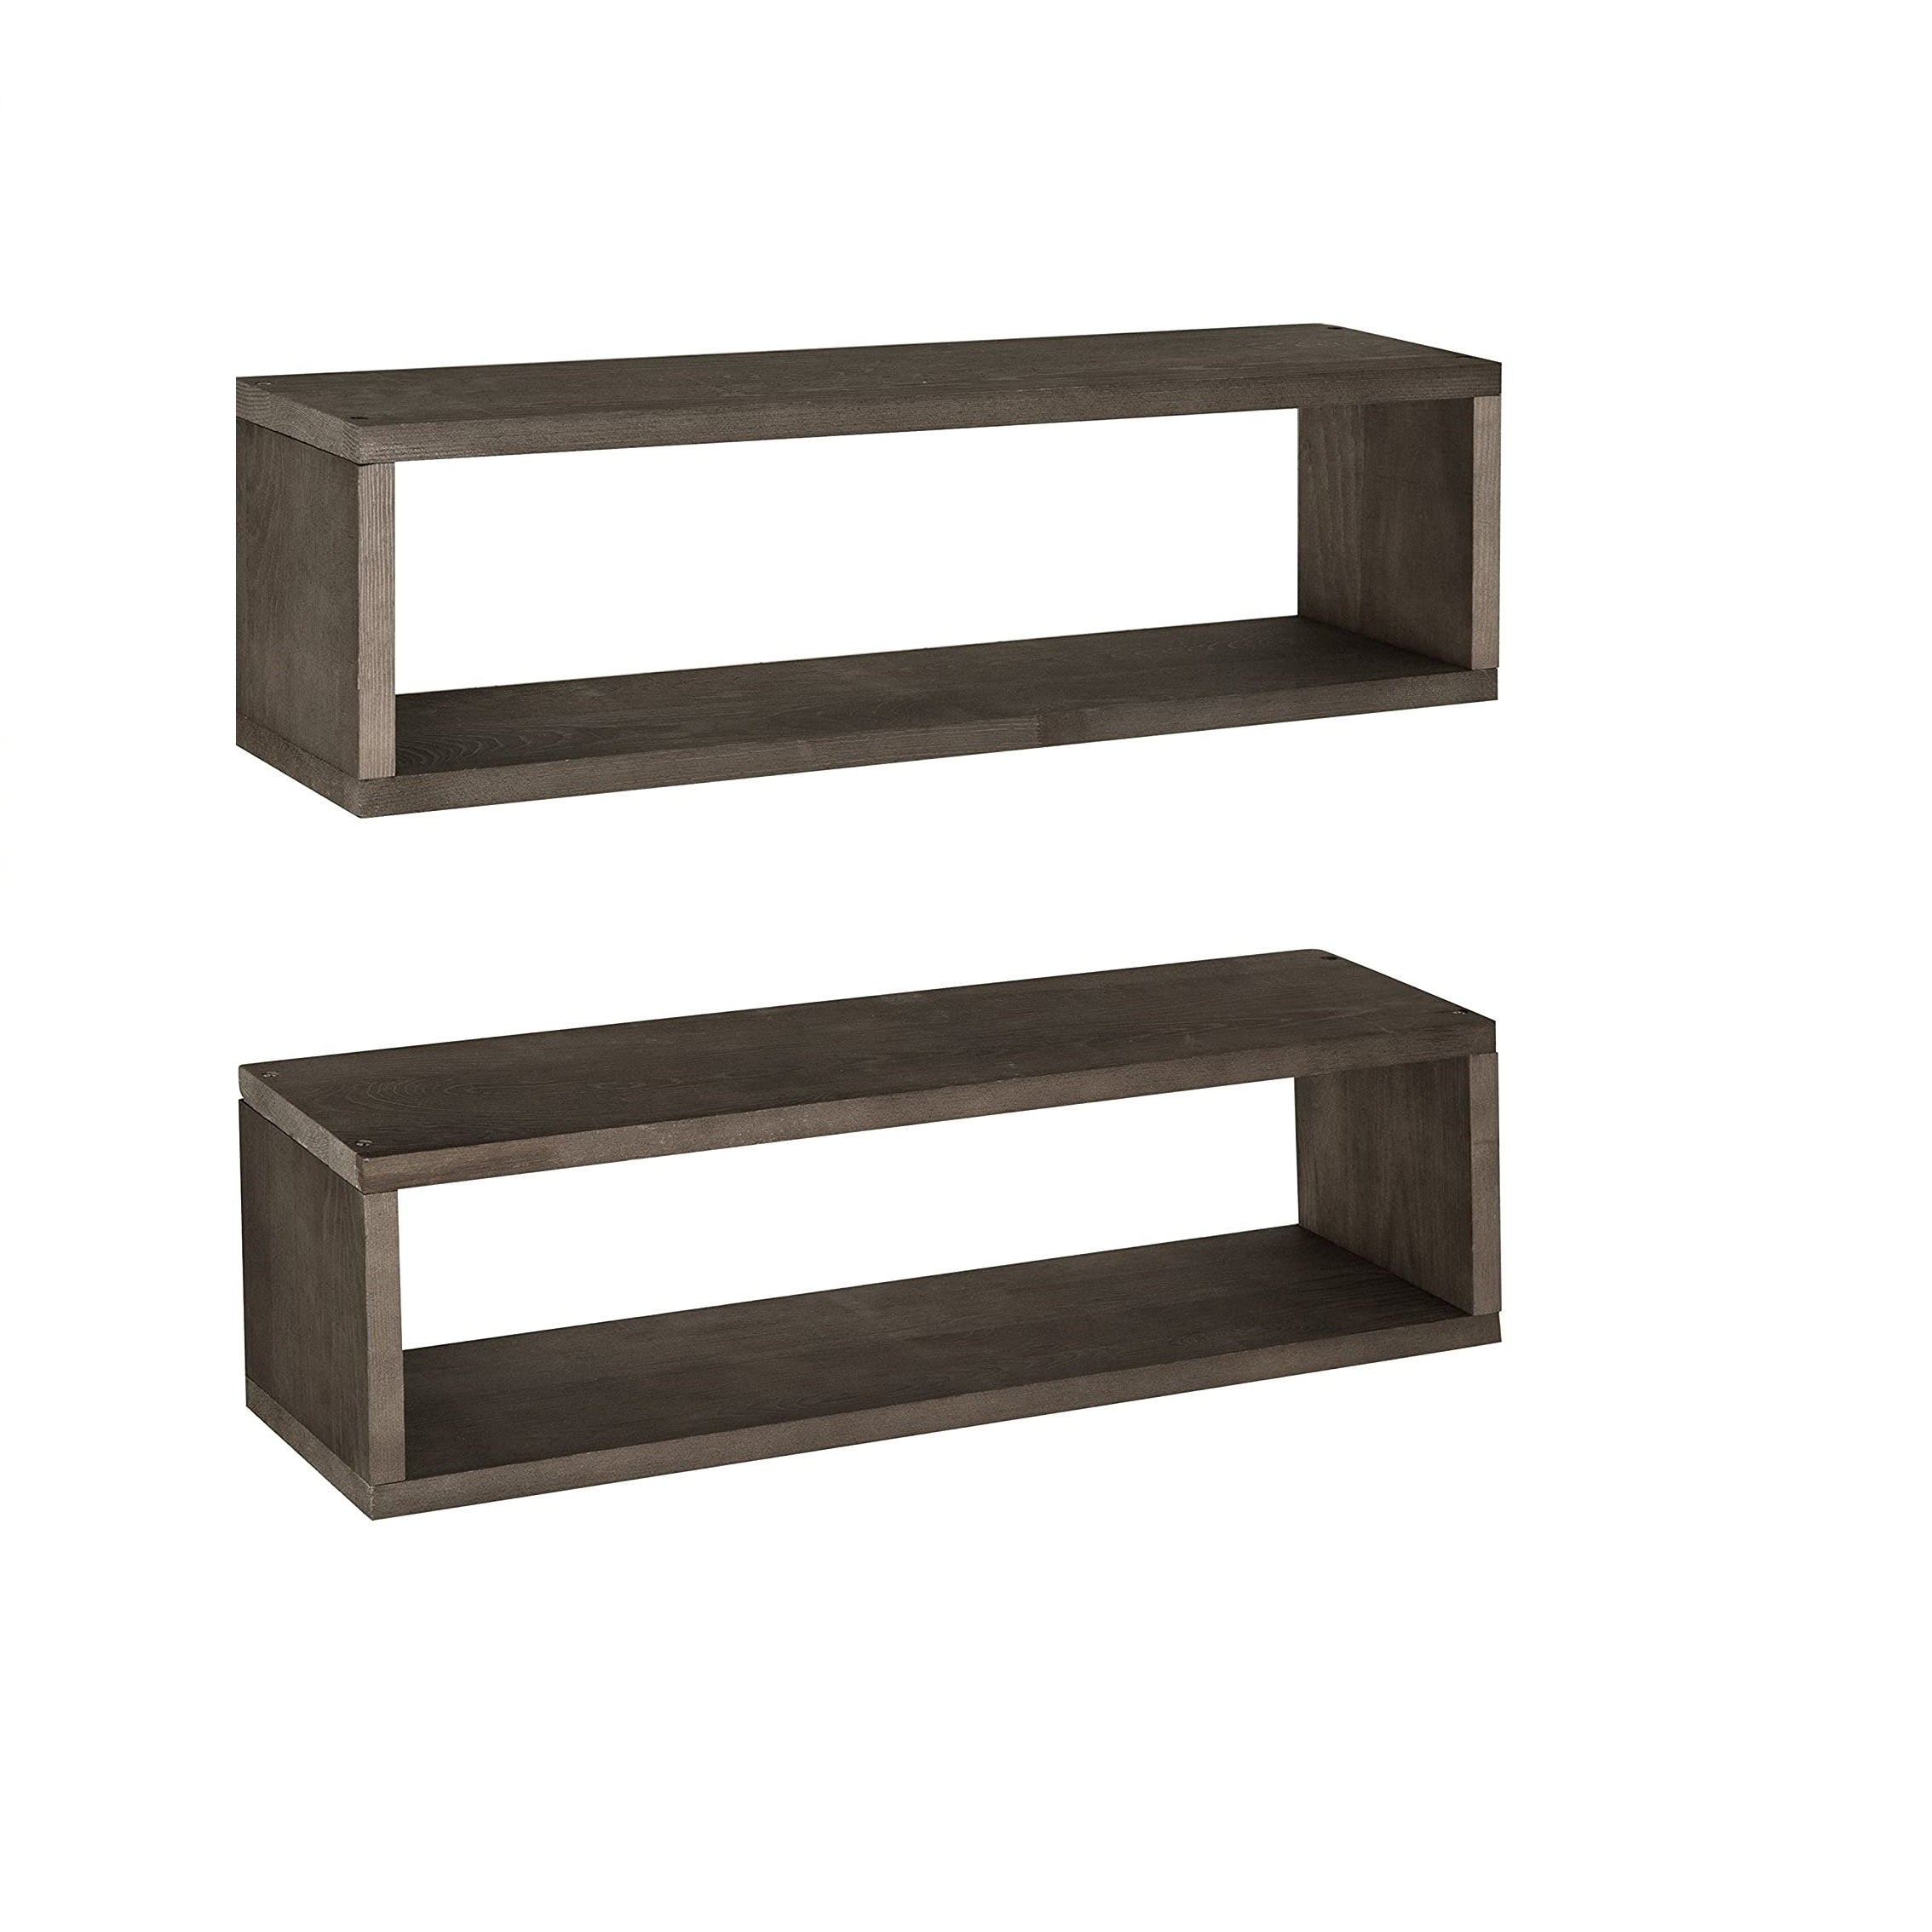 Display Boxes Living Lounge Drawing Room Floating Shelve (Set of 2) - waseeh.com